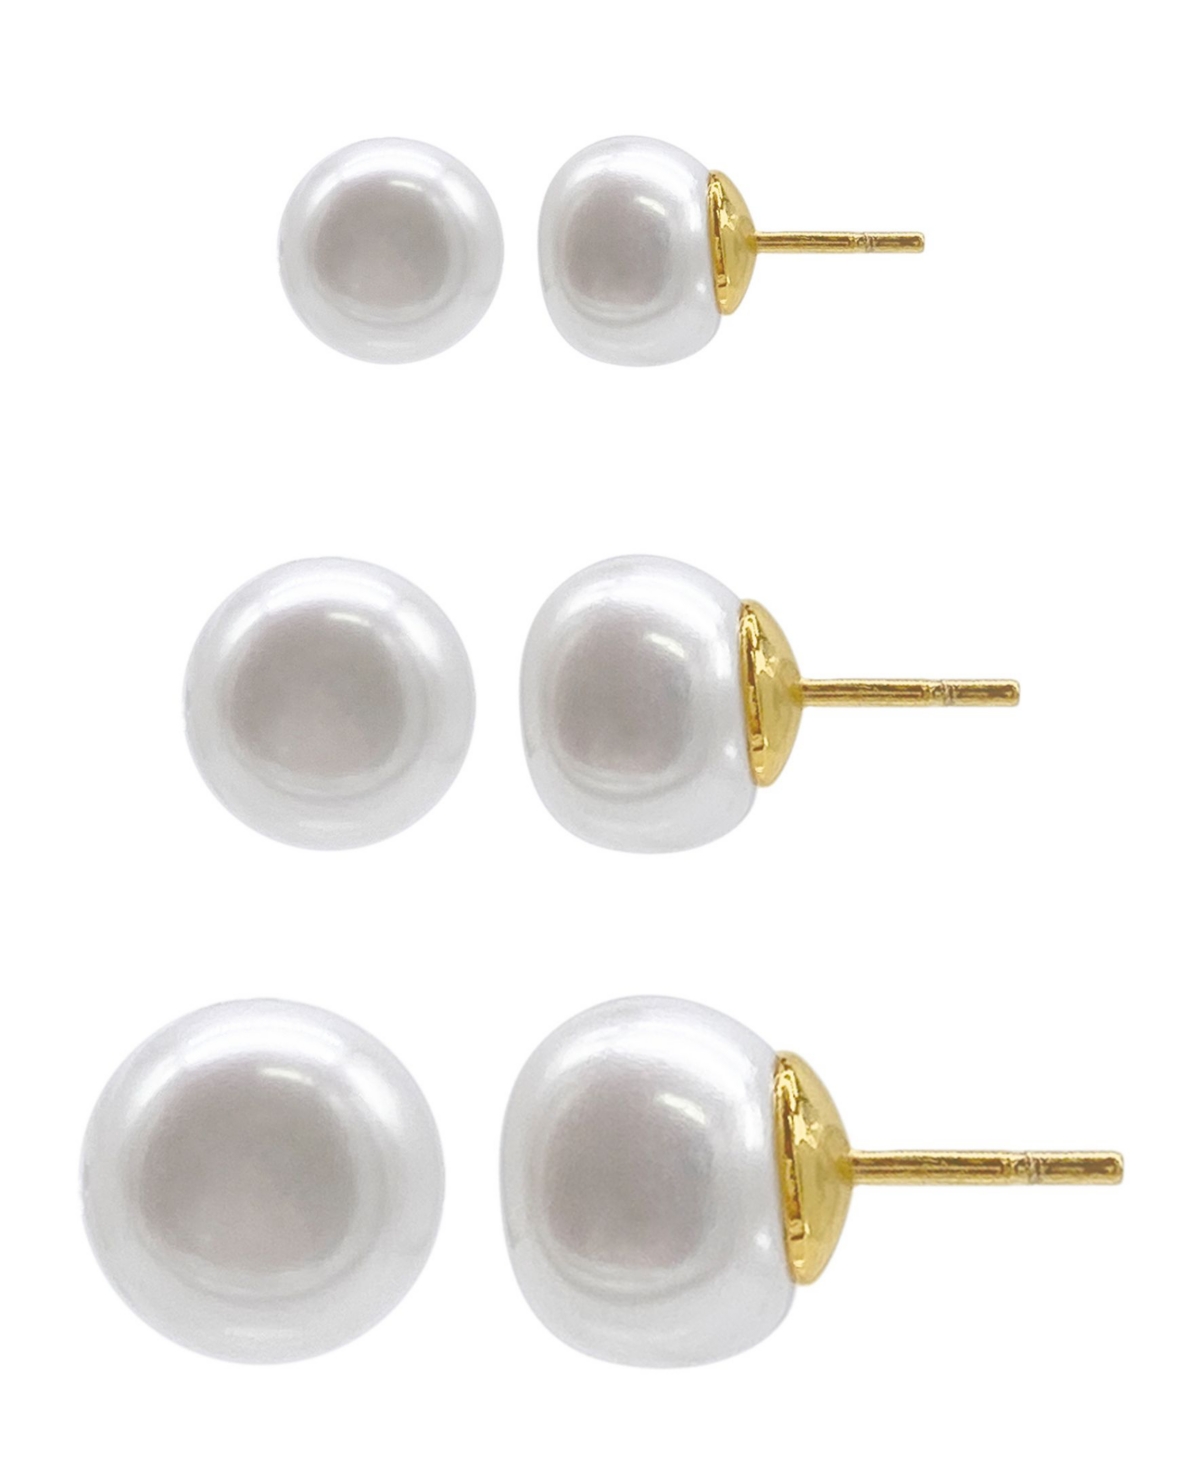 14K Gold Plated Freshwater Pearl Stud Earrings Set, 6 Pieces - White